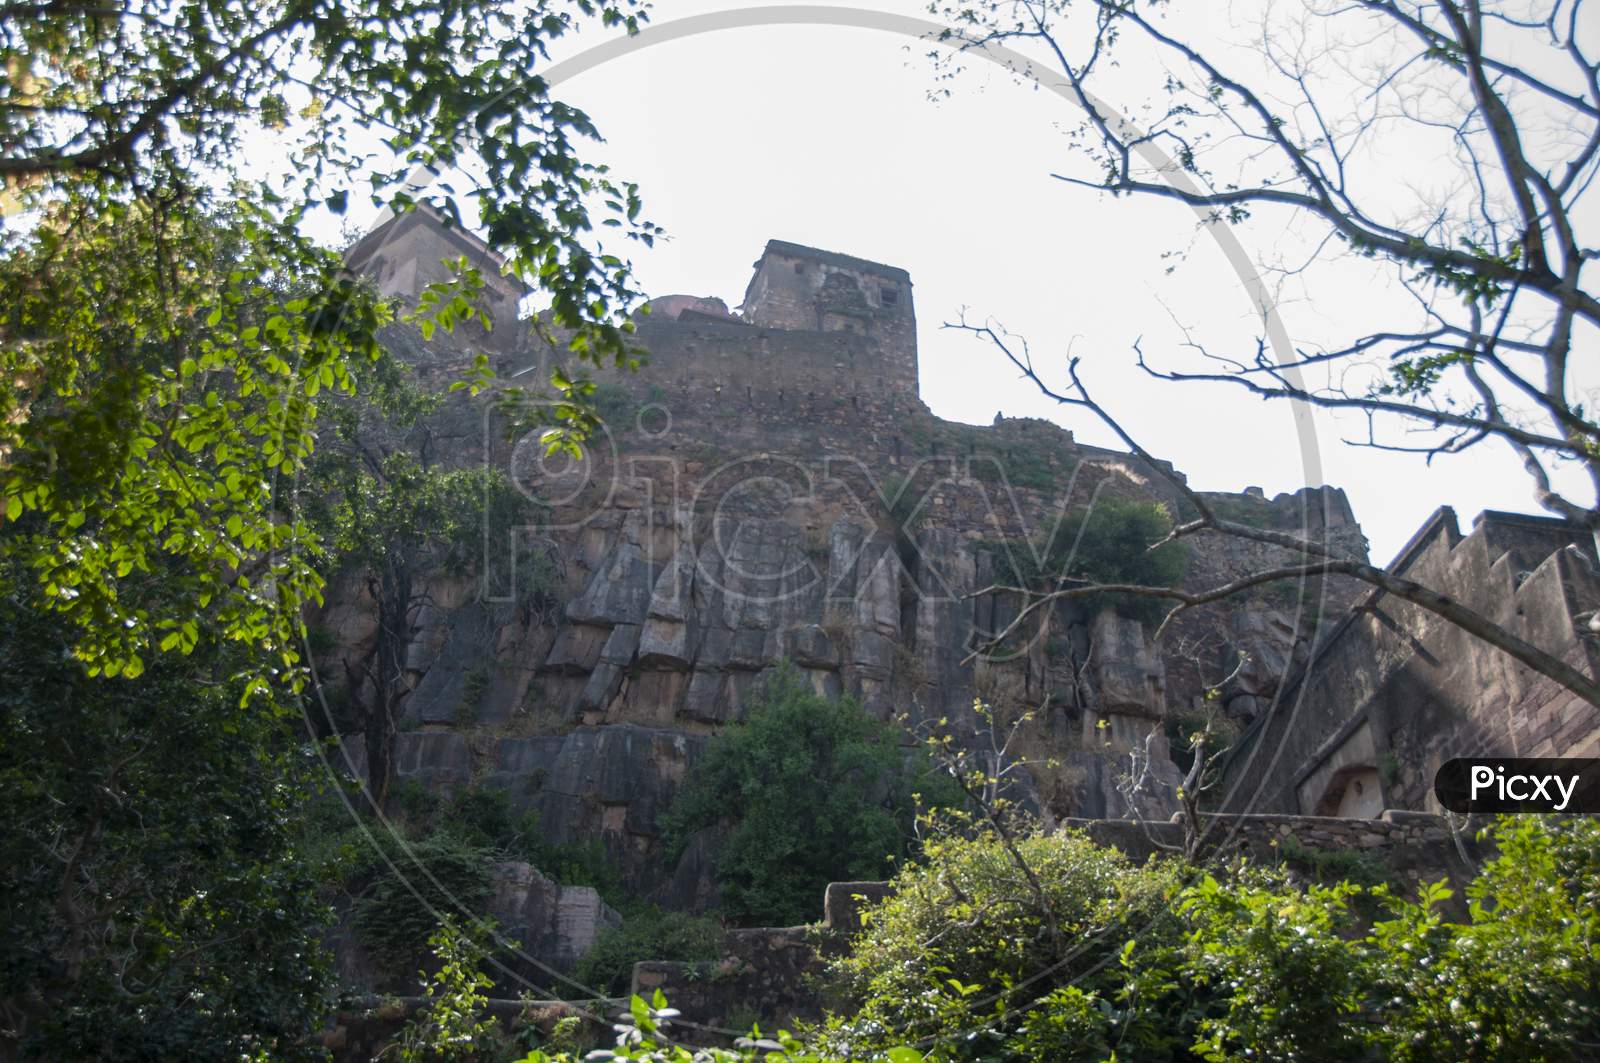 Ranthambore Fort Lies Within The Ranthambore National Park